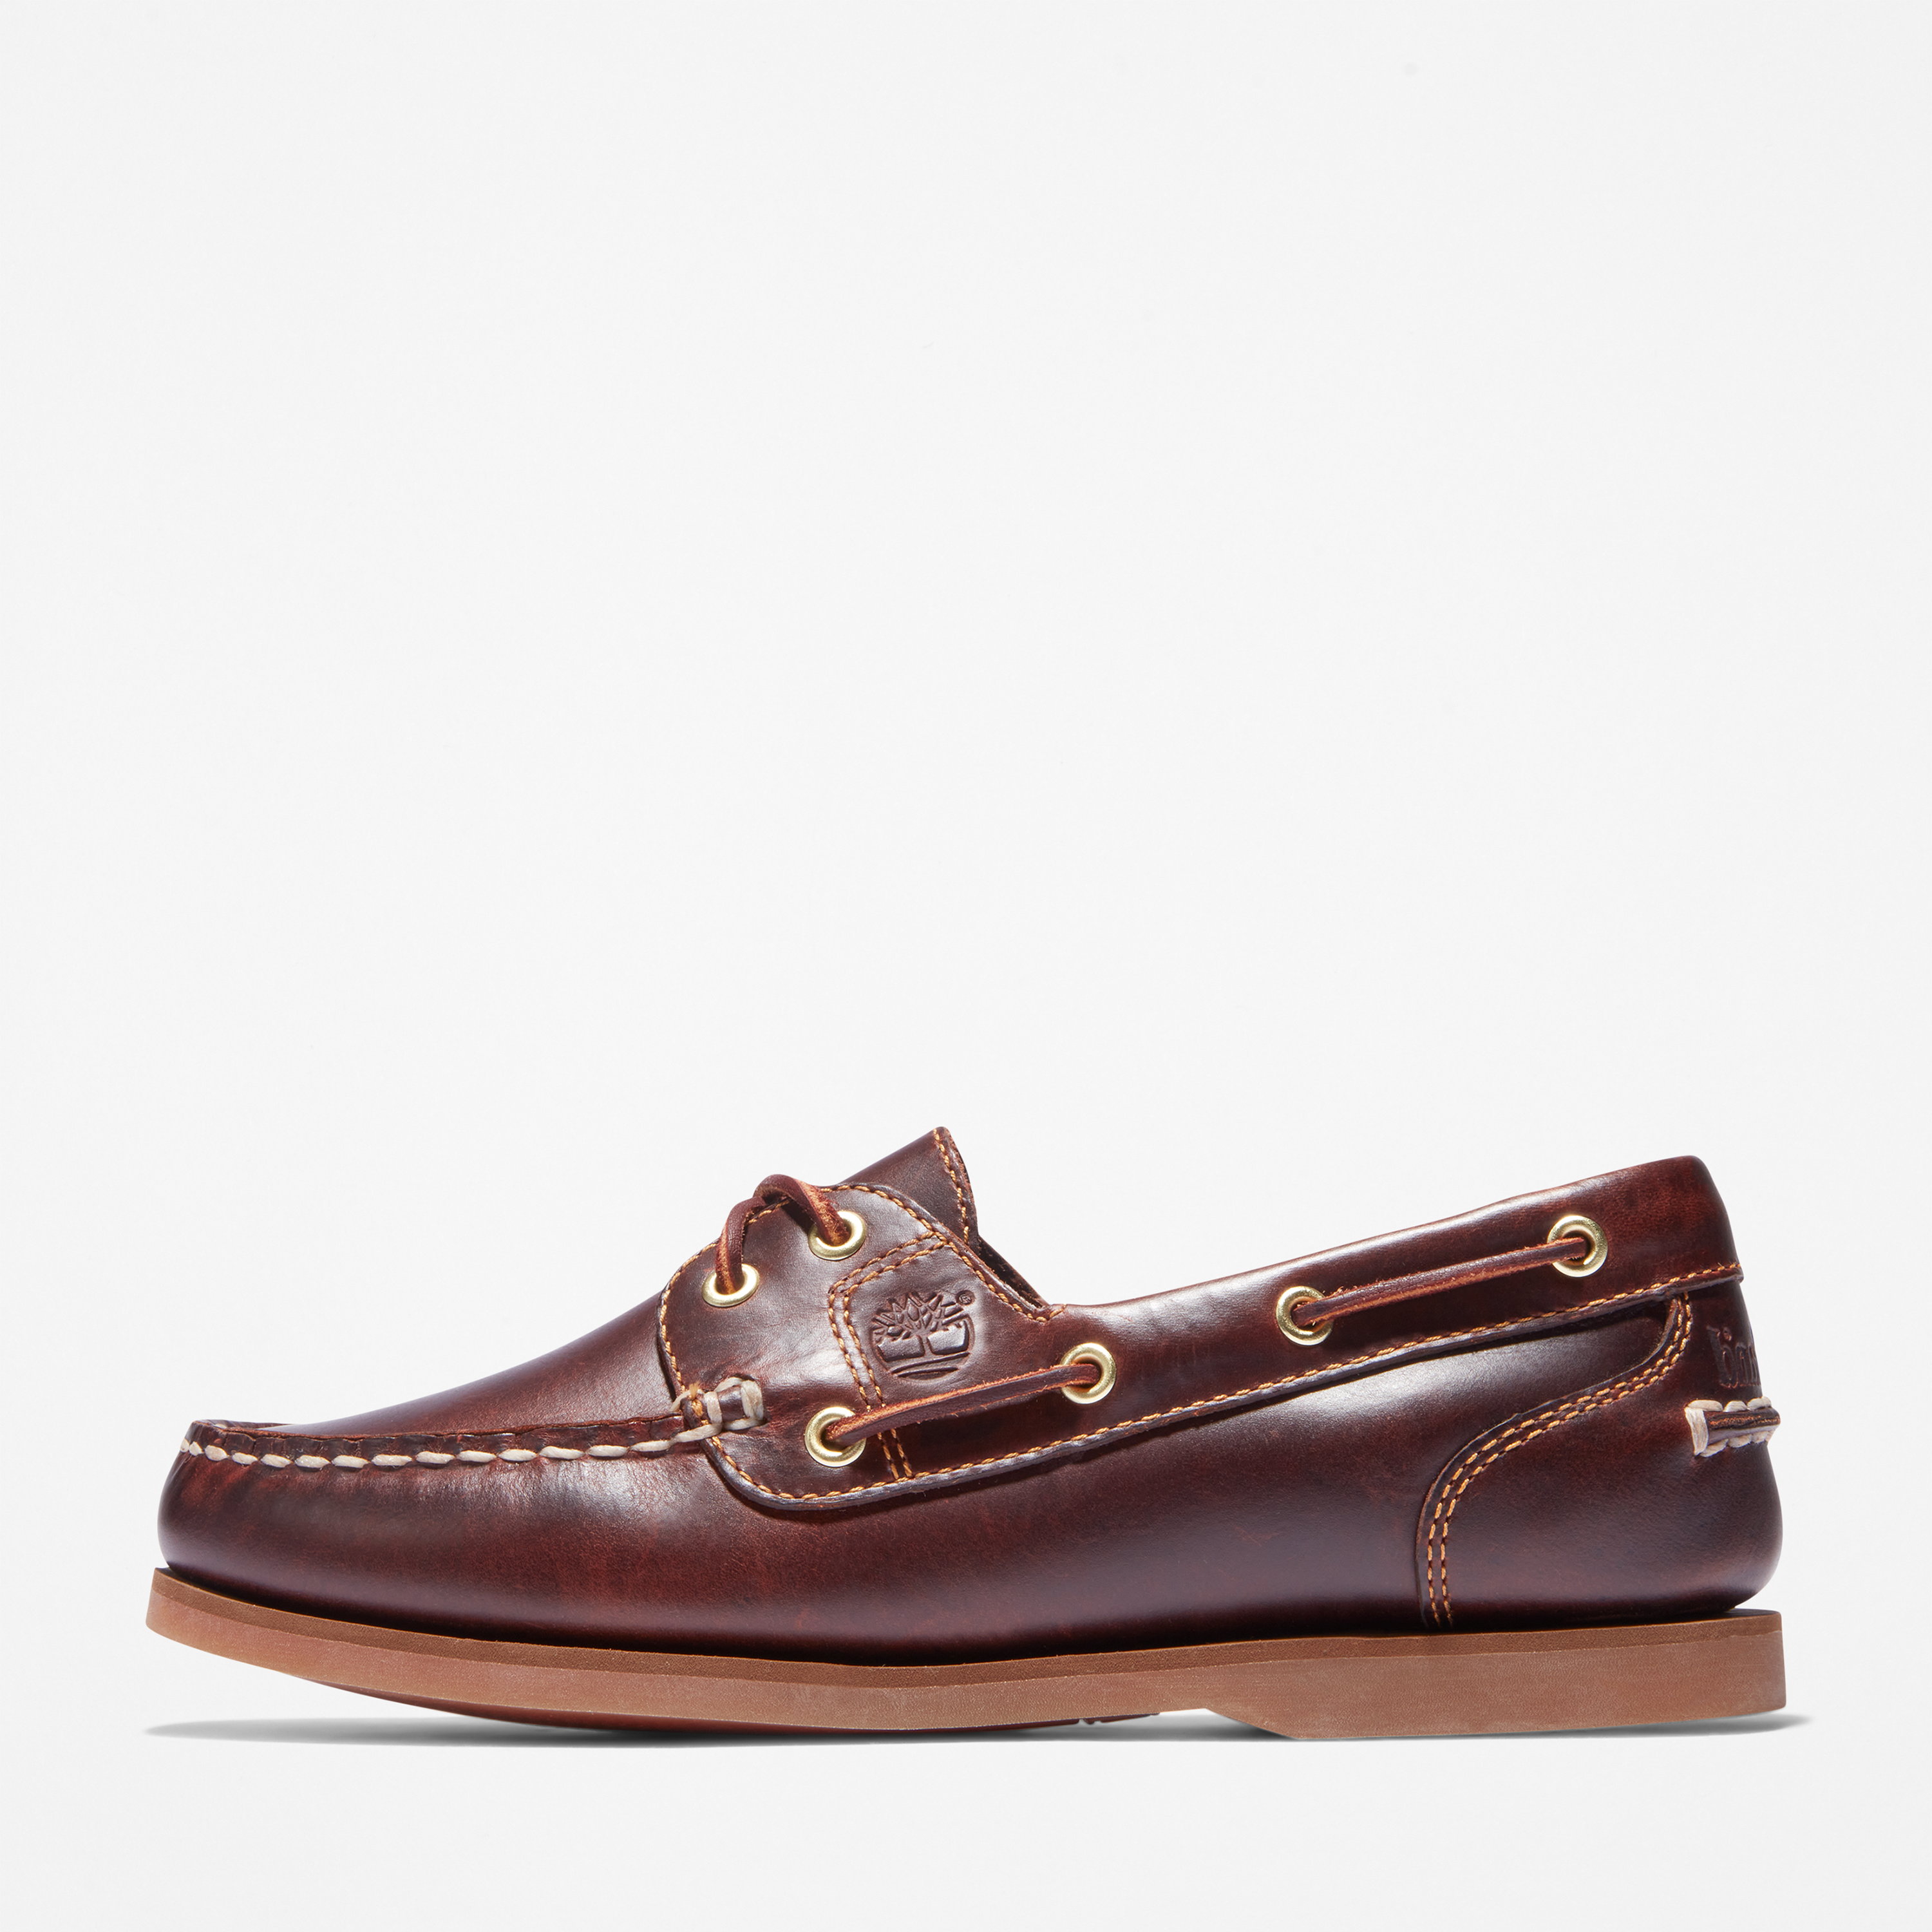 Women's Classic Leather Boat Shoes - Timberland -